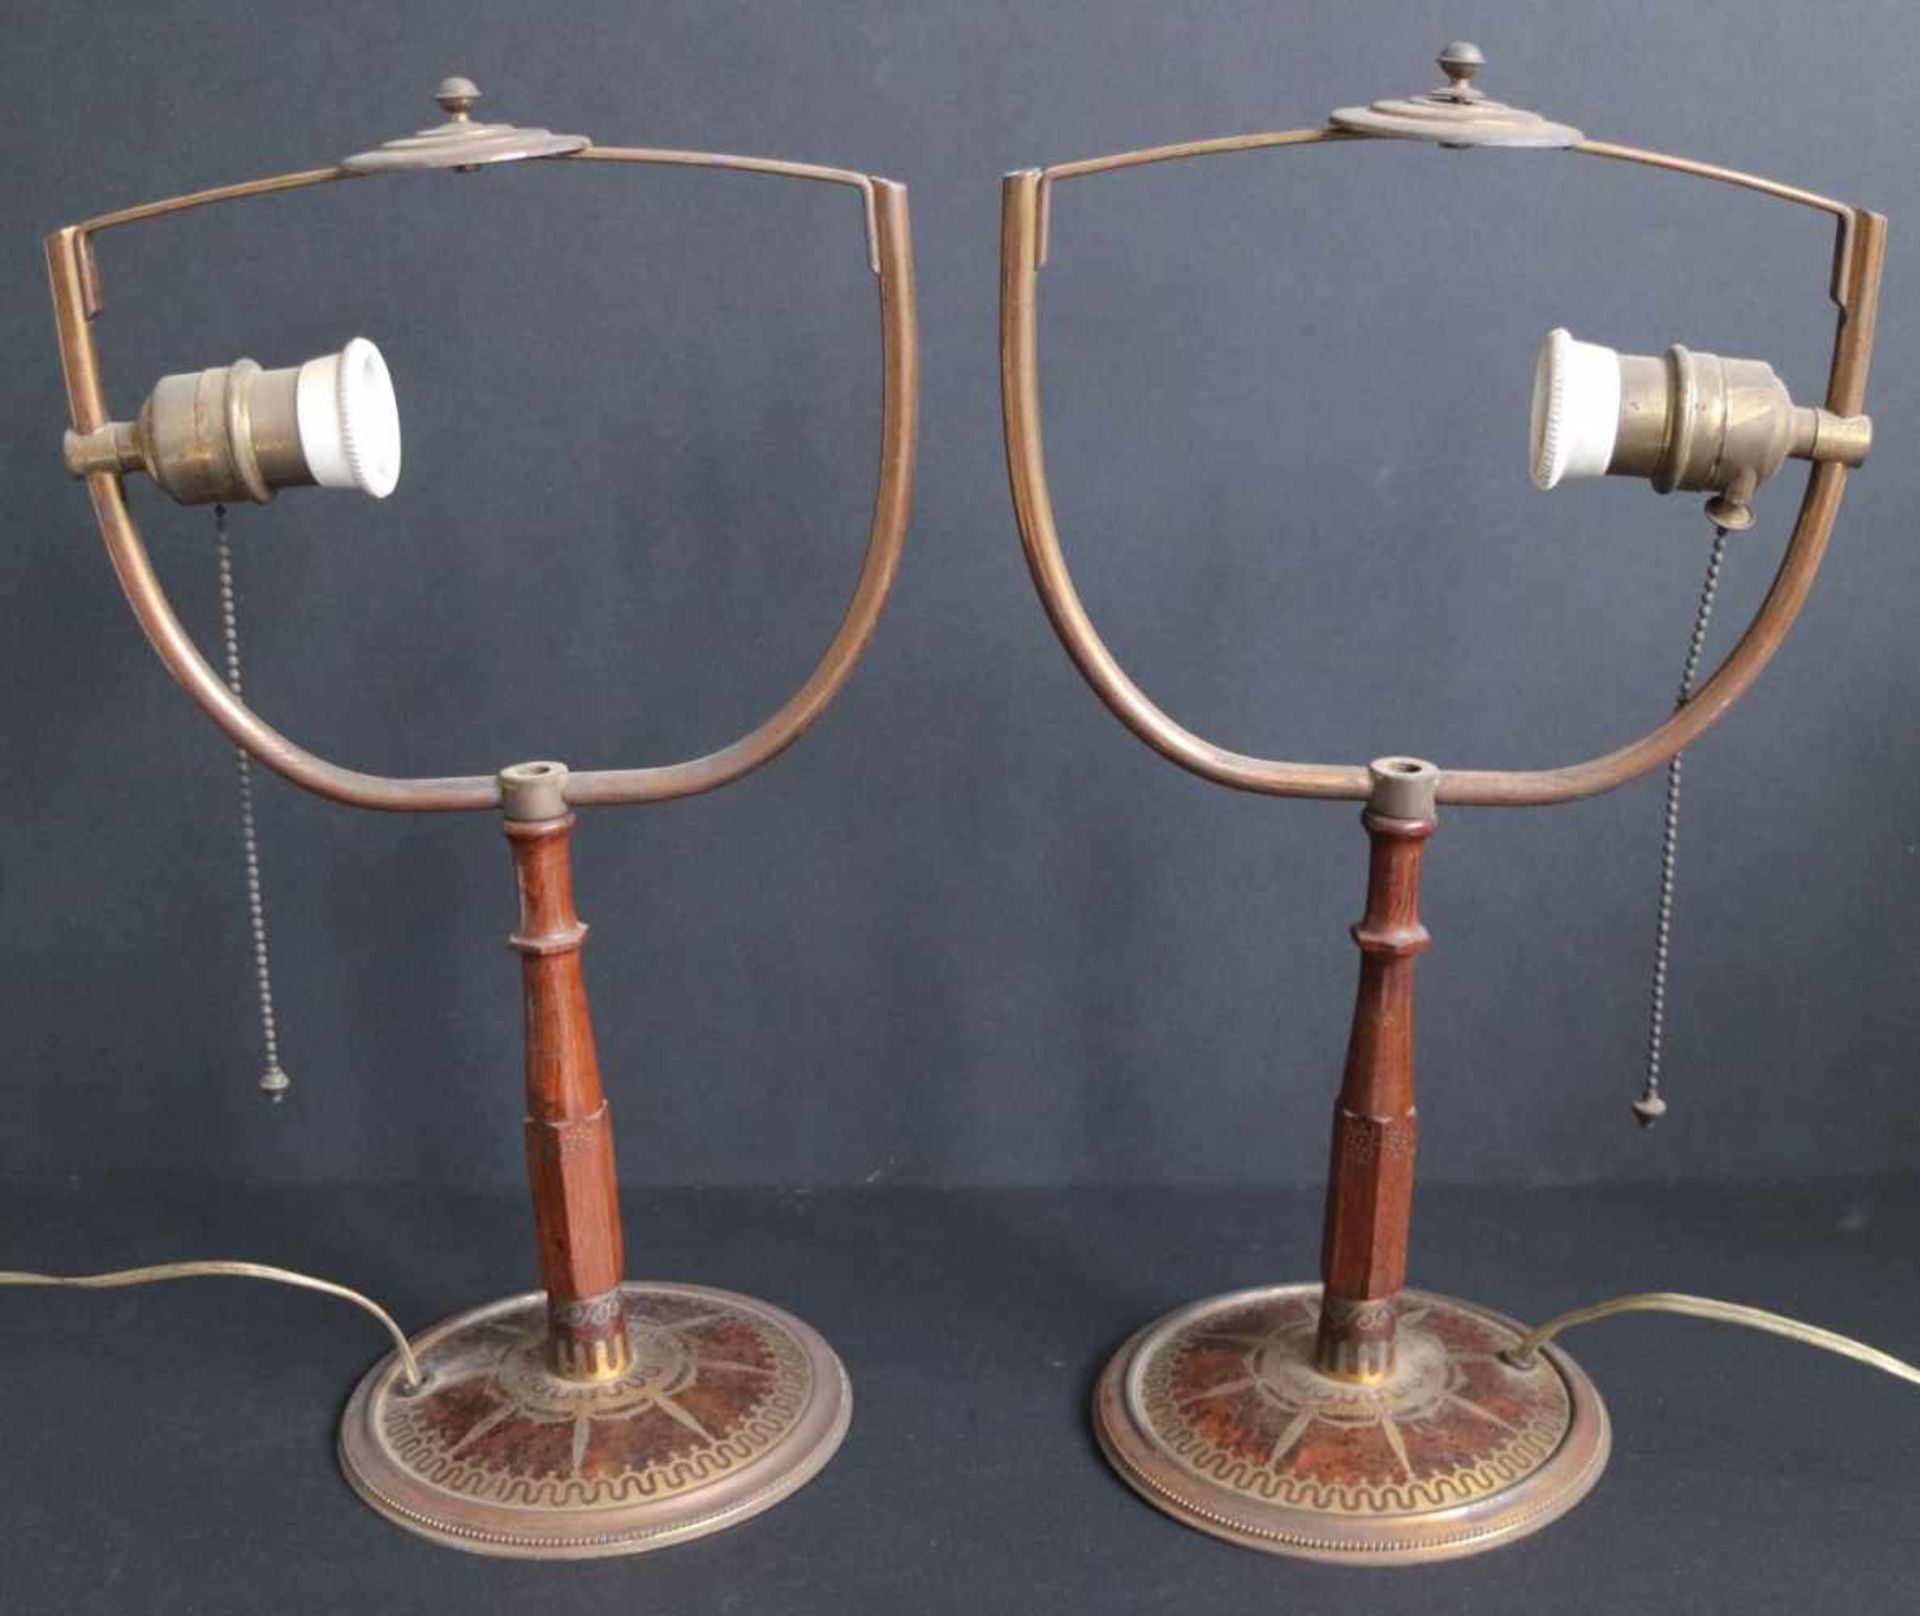 Erhard & SöhneCouple table lamps (without shade)H 42 cm Erhard & SöhneCouple table lamps (without